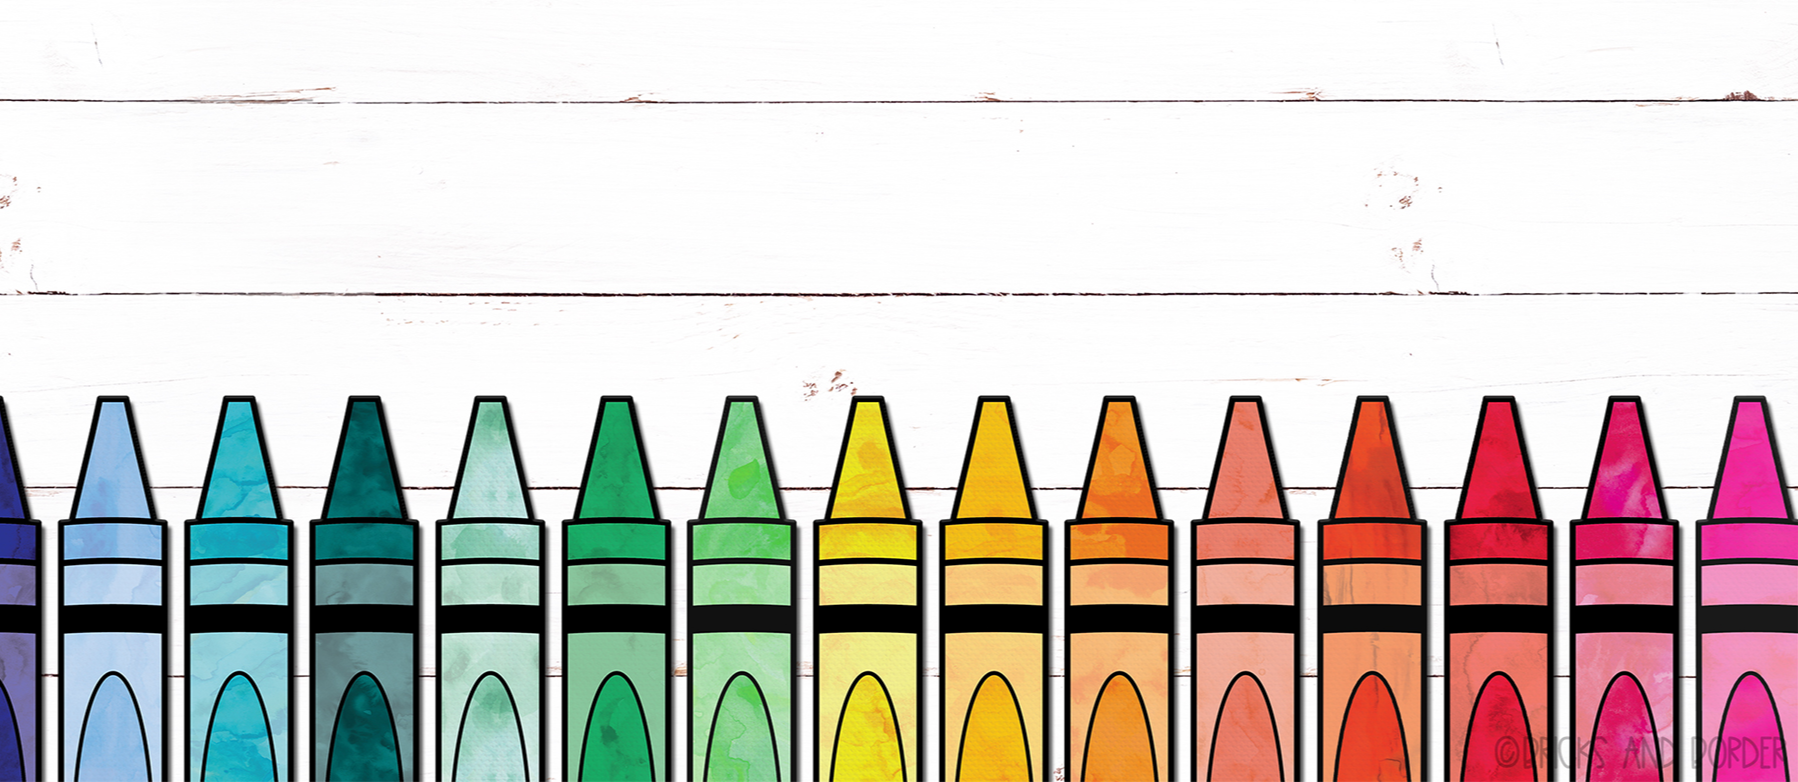 Picture of crayons